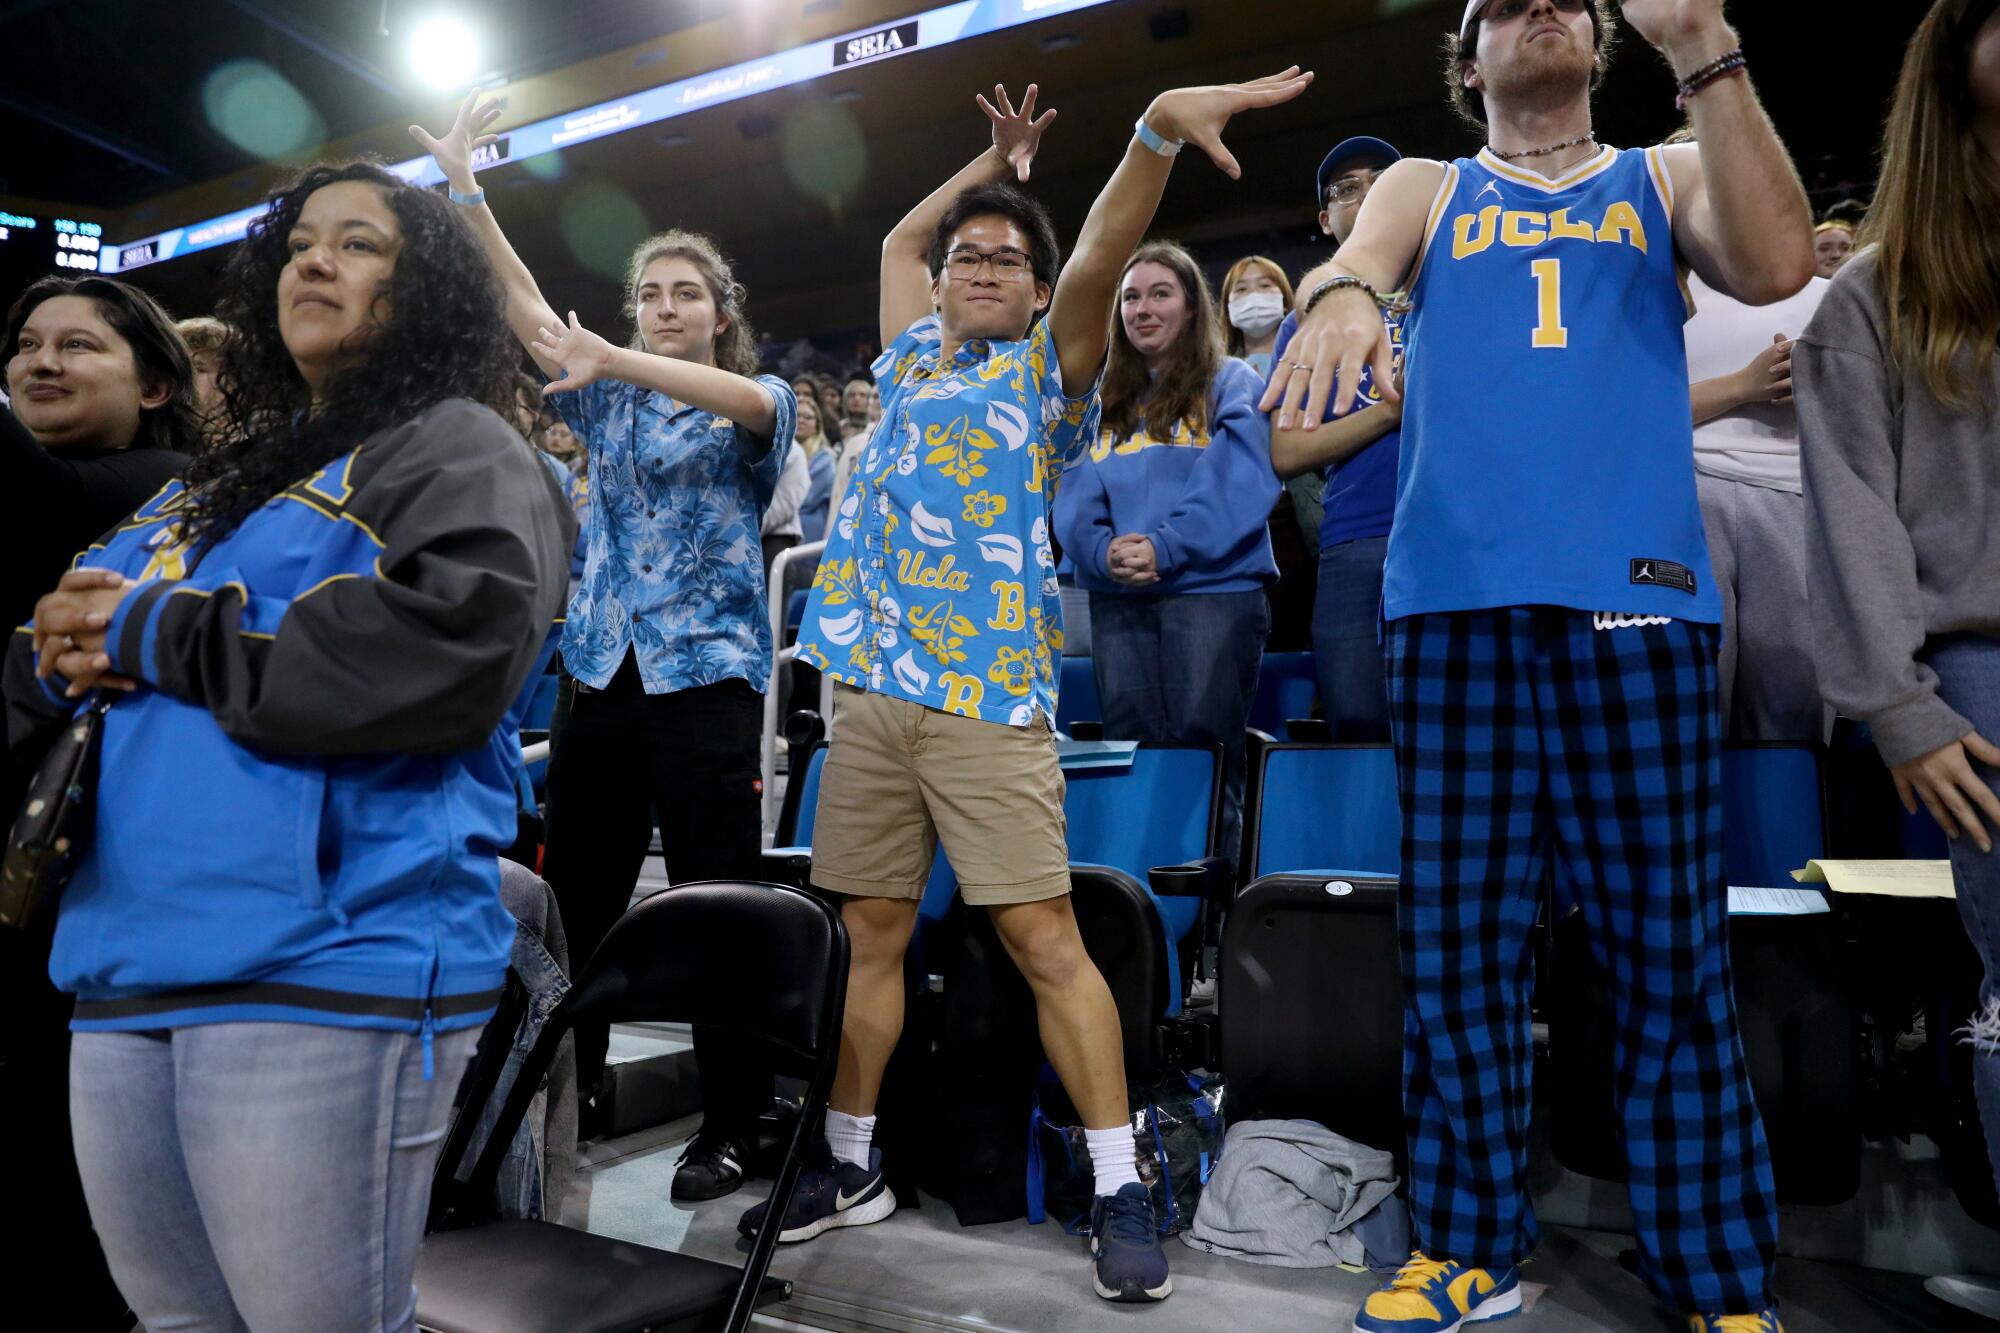 UCLA super fan Josh Lim and friend Laura DeFalco mimic a Bruins gymnast's floor exercise routine.